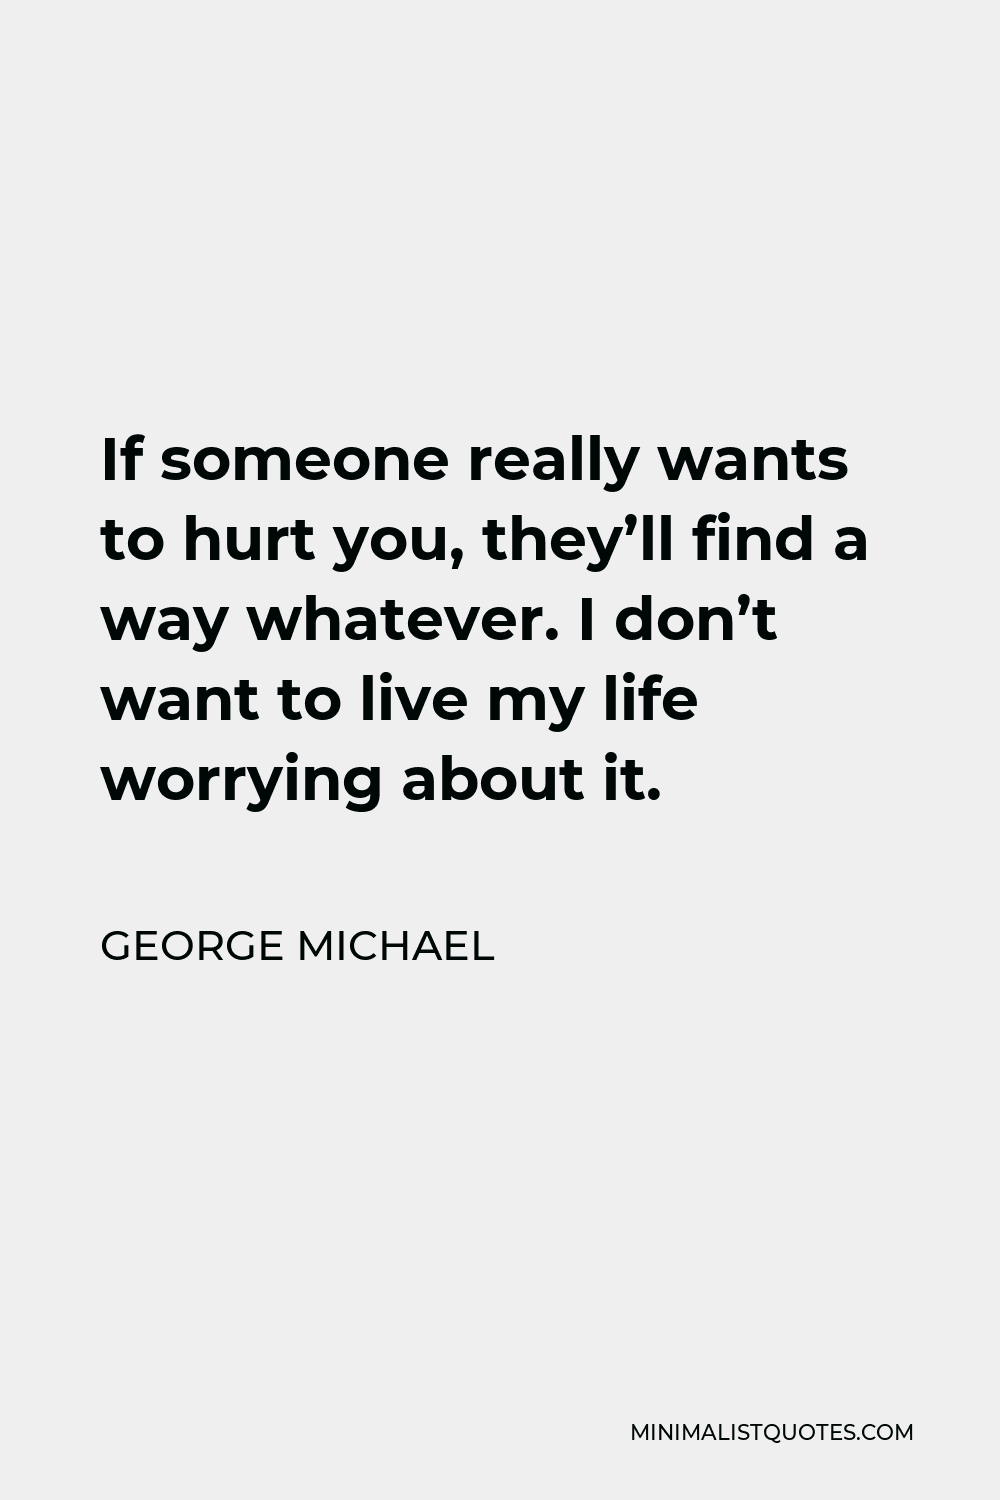 George Michael Quote - If someone really wants to hurt you, they’ll find a way whatever. I don’t want to live my life worrying about it.